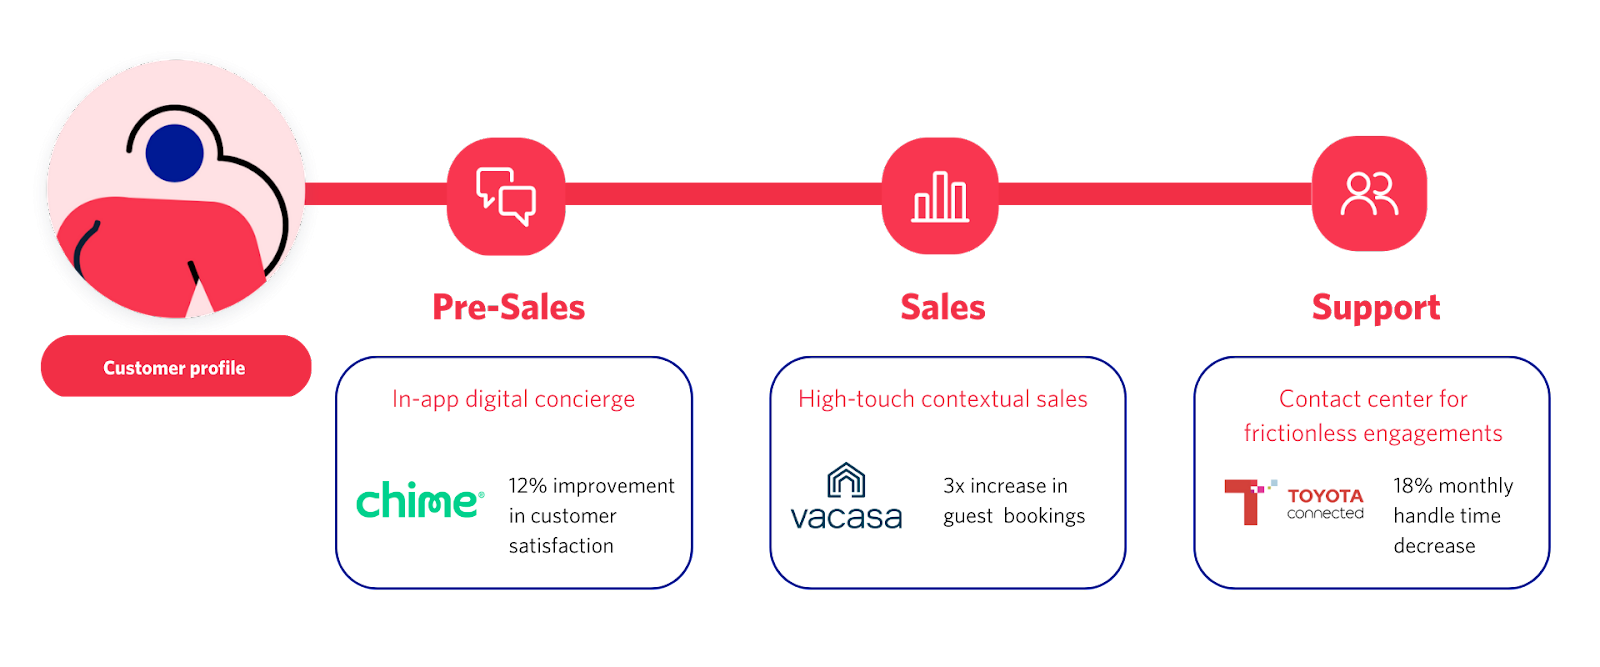 Pre-sales, sales, and support customer profiles